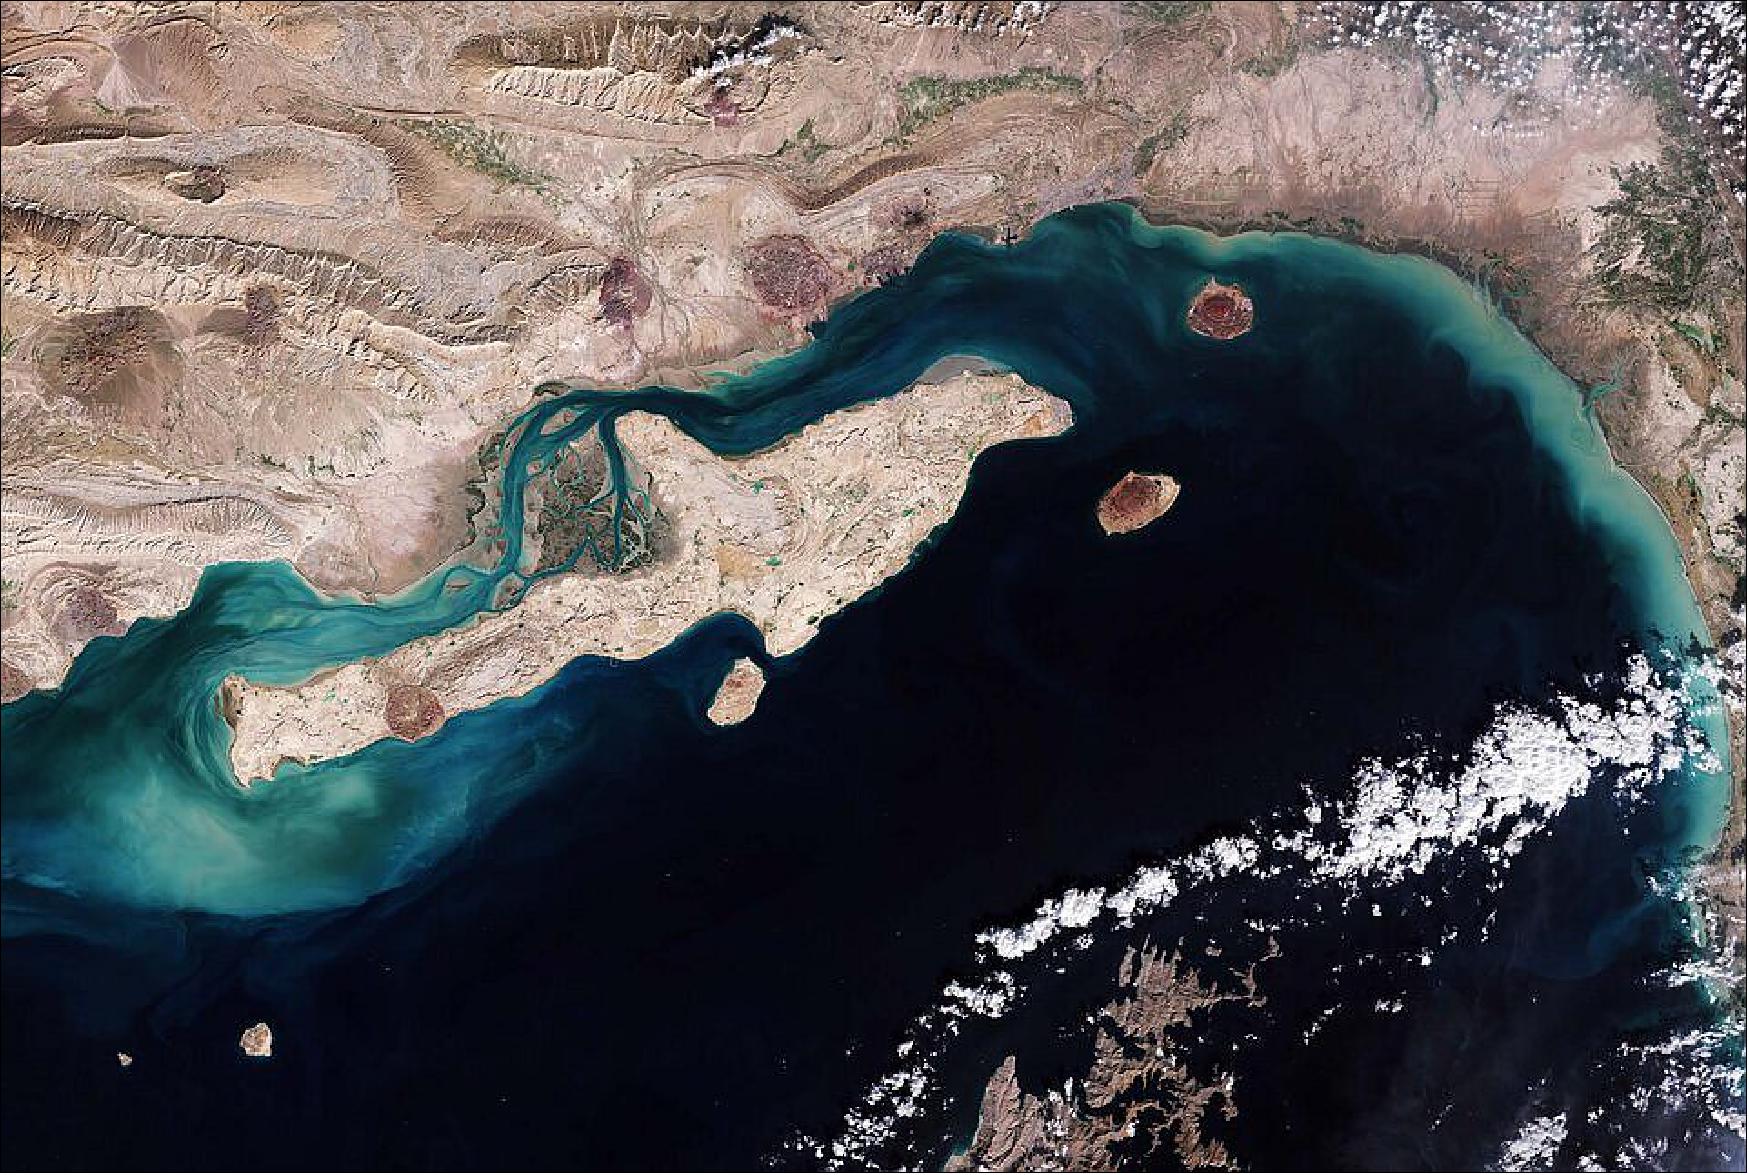 Figure 48: The Sentinel-2 image shows the largely arid land surfaces on both Qeshm Island and mainland Iran. The island generally has a rocky coastline except for the sandy bays and mud flats that fringe the northwest part of the island. This image is also featured on the Earth from Space video program (image credit: ESA the image contains modified Copernicus Sentinel data (2020), processed by ESA, CC BY-SA 3.0 IGO)